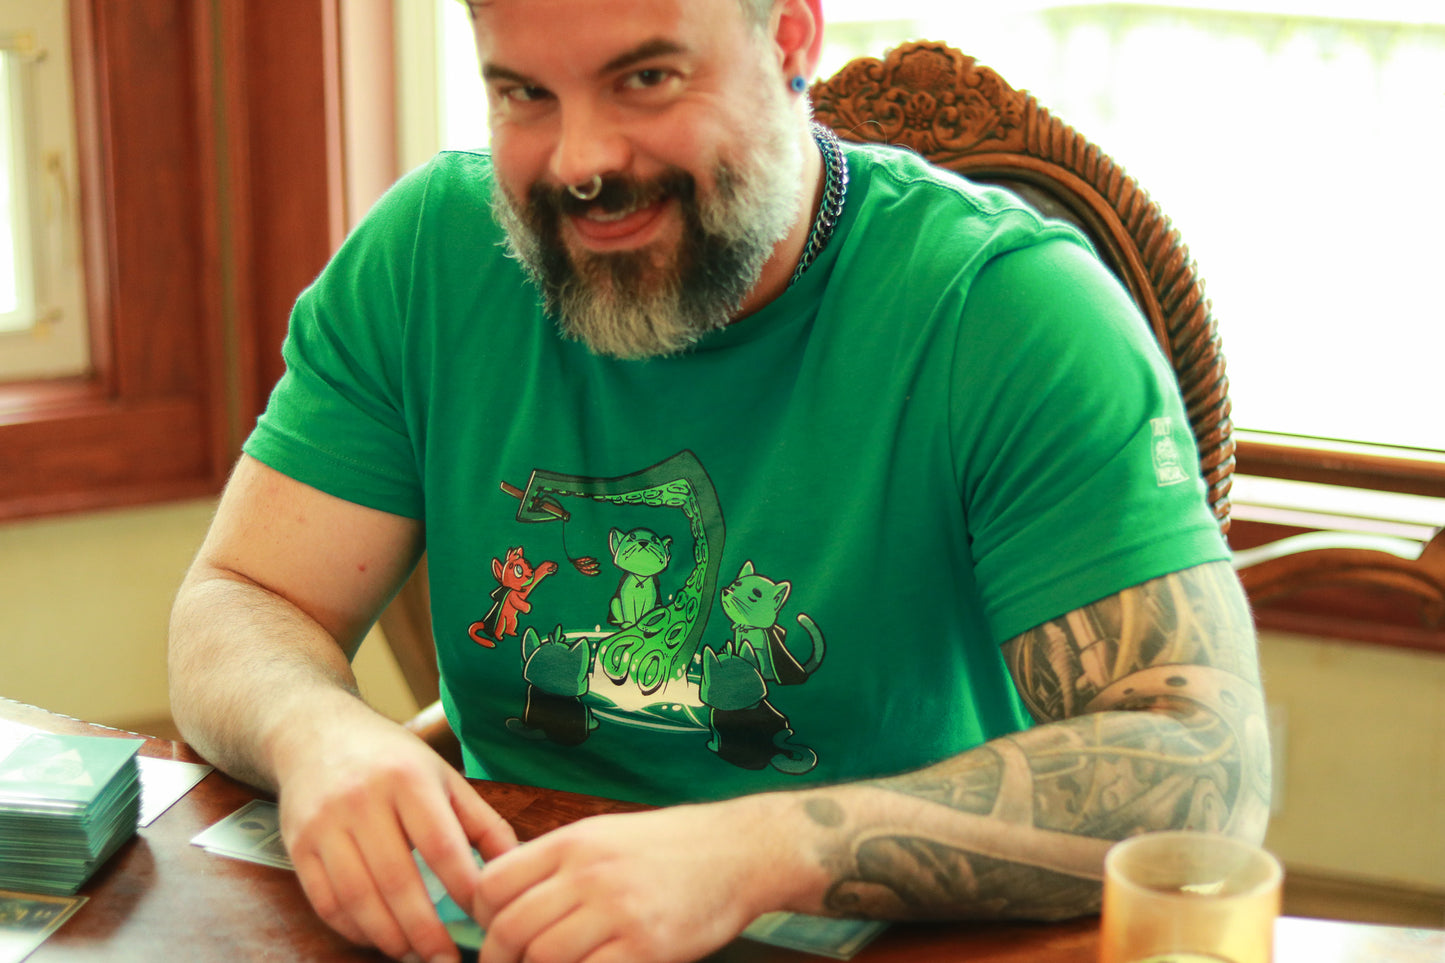 Devious man with beard playing magic the gathering wearing t-shirt featuring5 cats summoning a tentacle, one an orange cat playing with a feather toy held by the tentacle